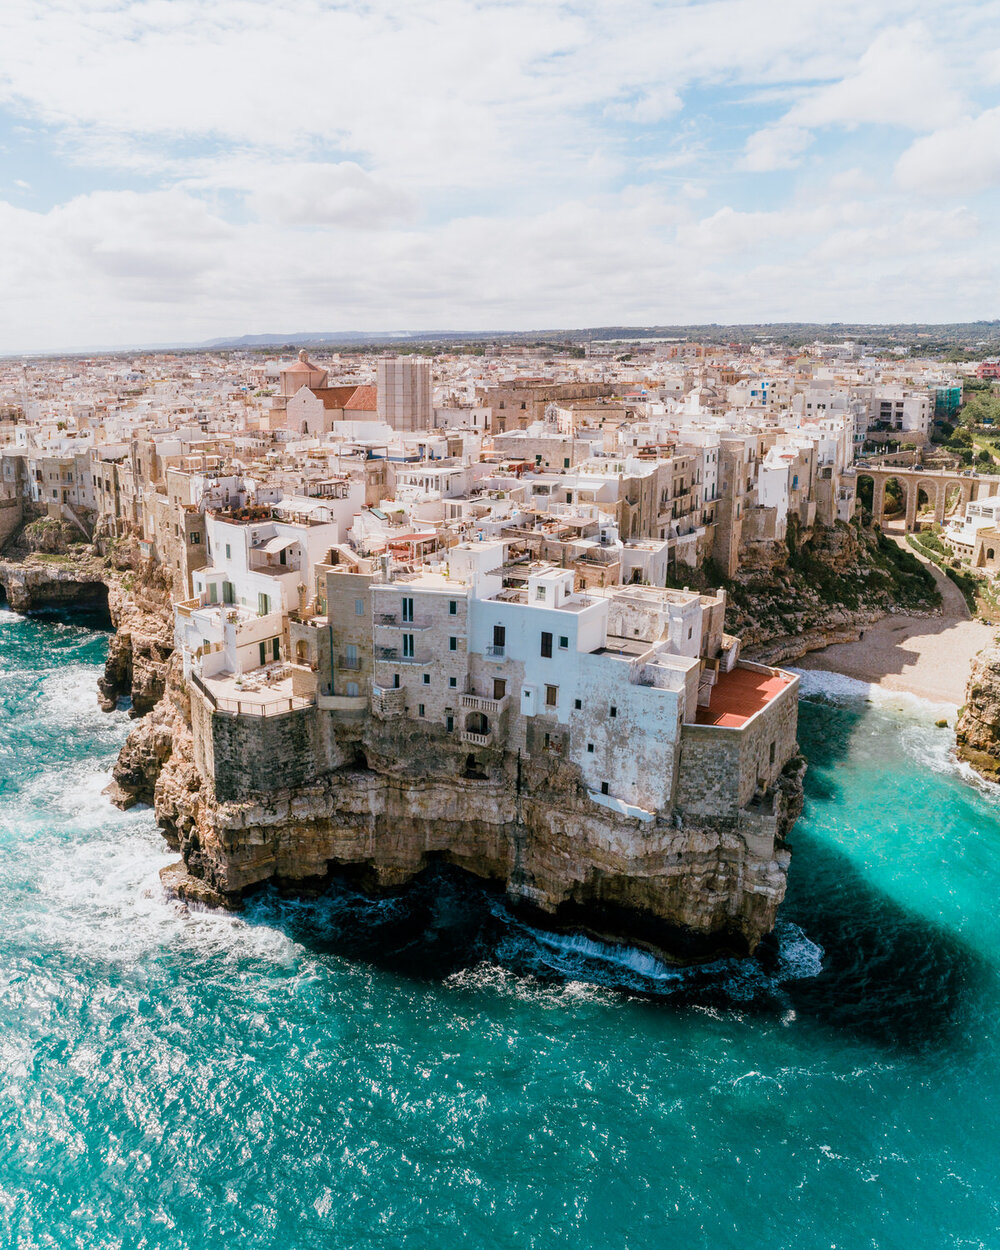 Where Is Puglia Italy? - Discover The Bread Basket Of Italy